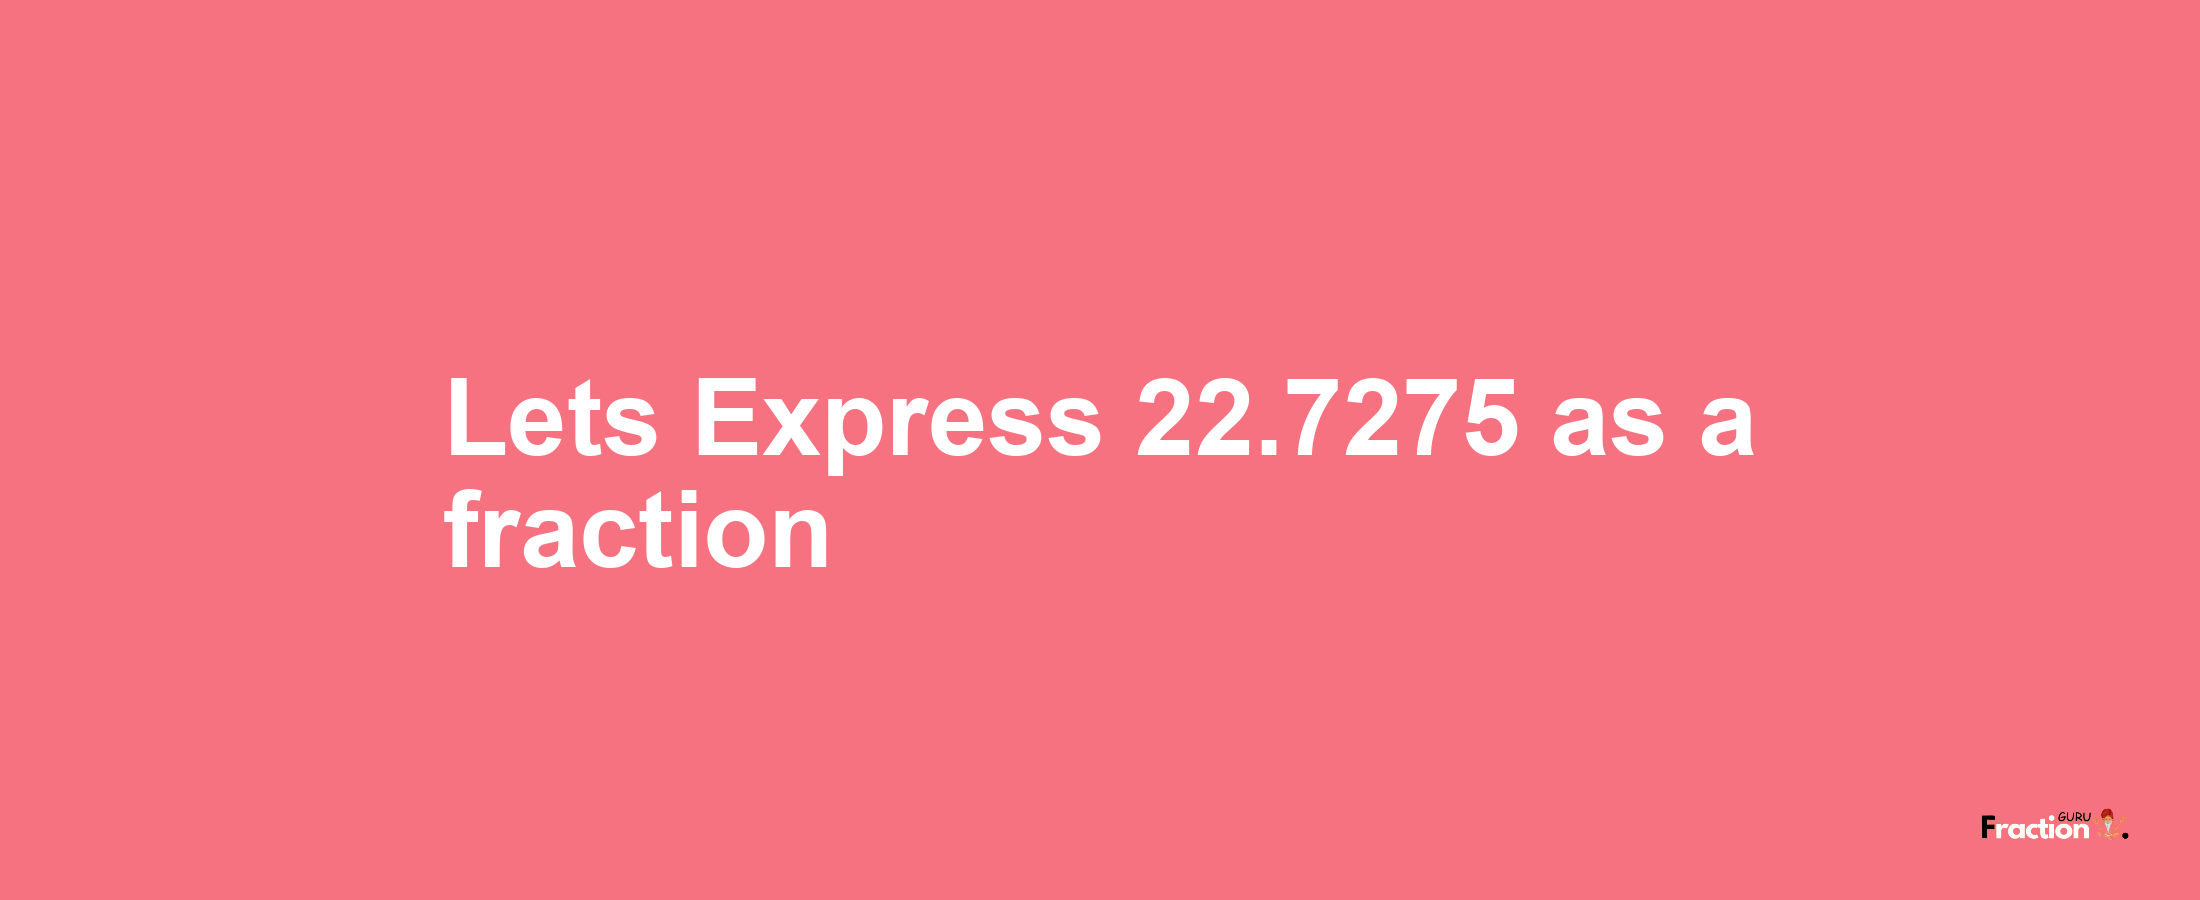 Lets Express 22.7275 as afraction